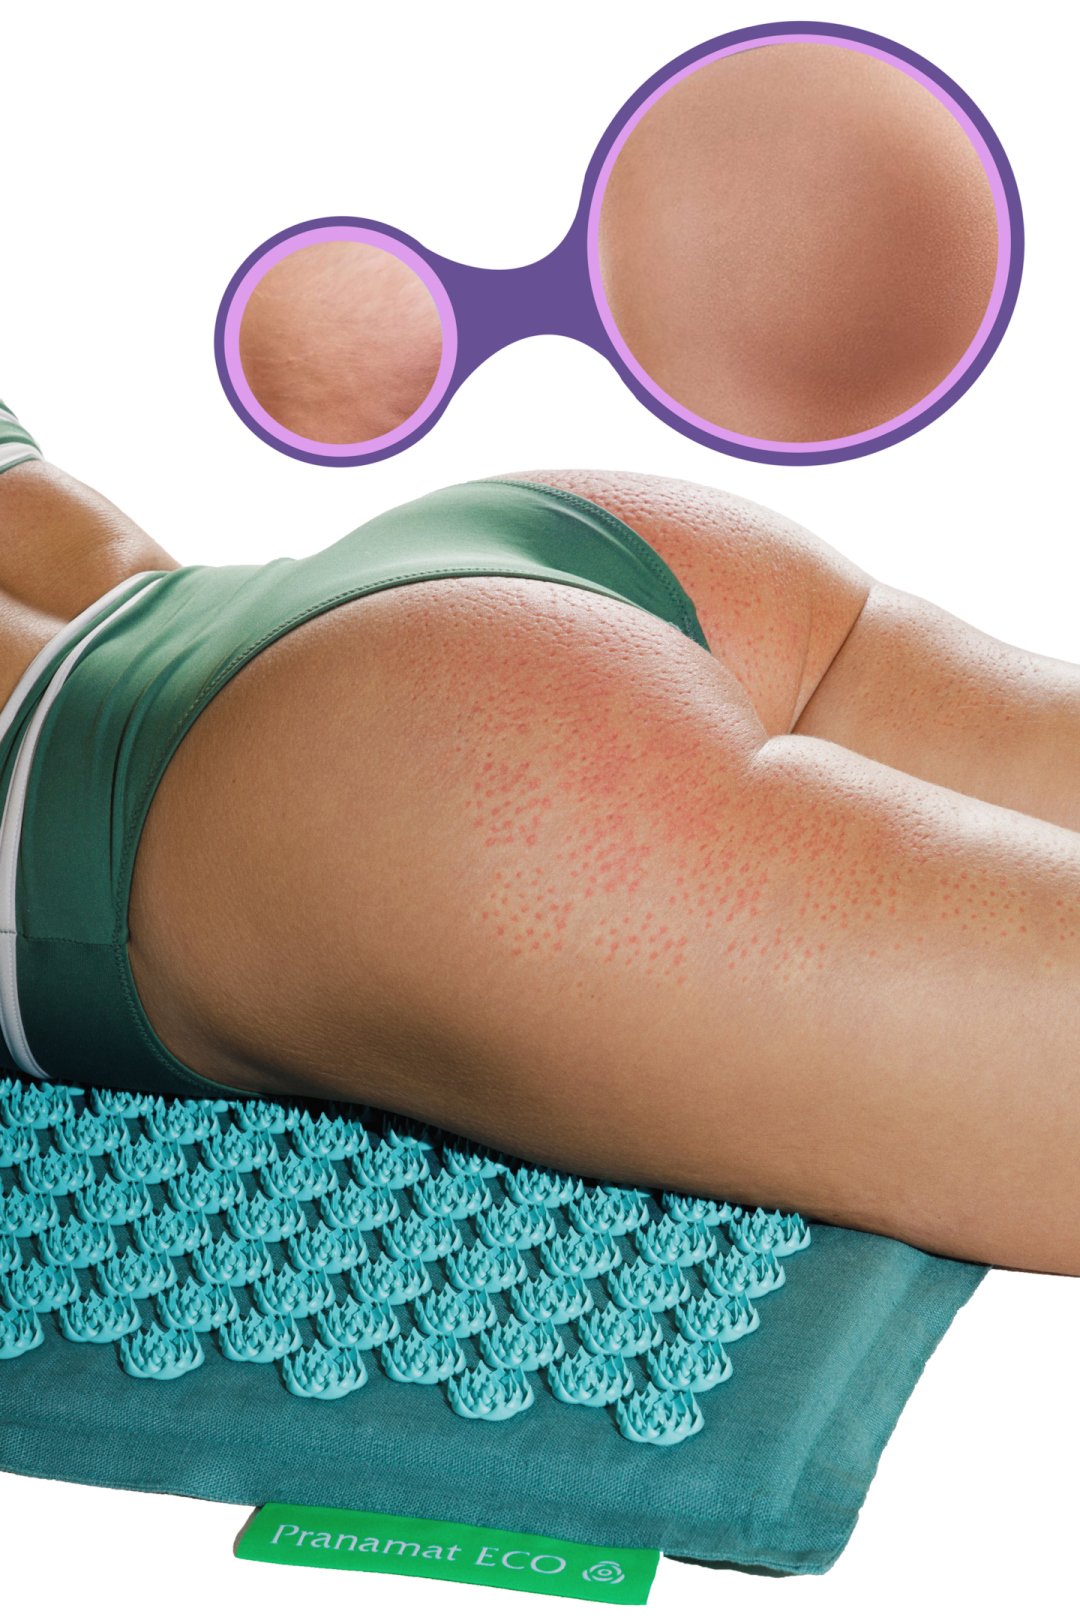 Increase the circulation to the problem area and reduce the cellulite